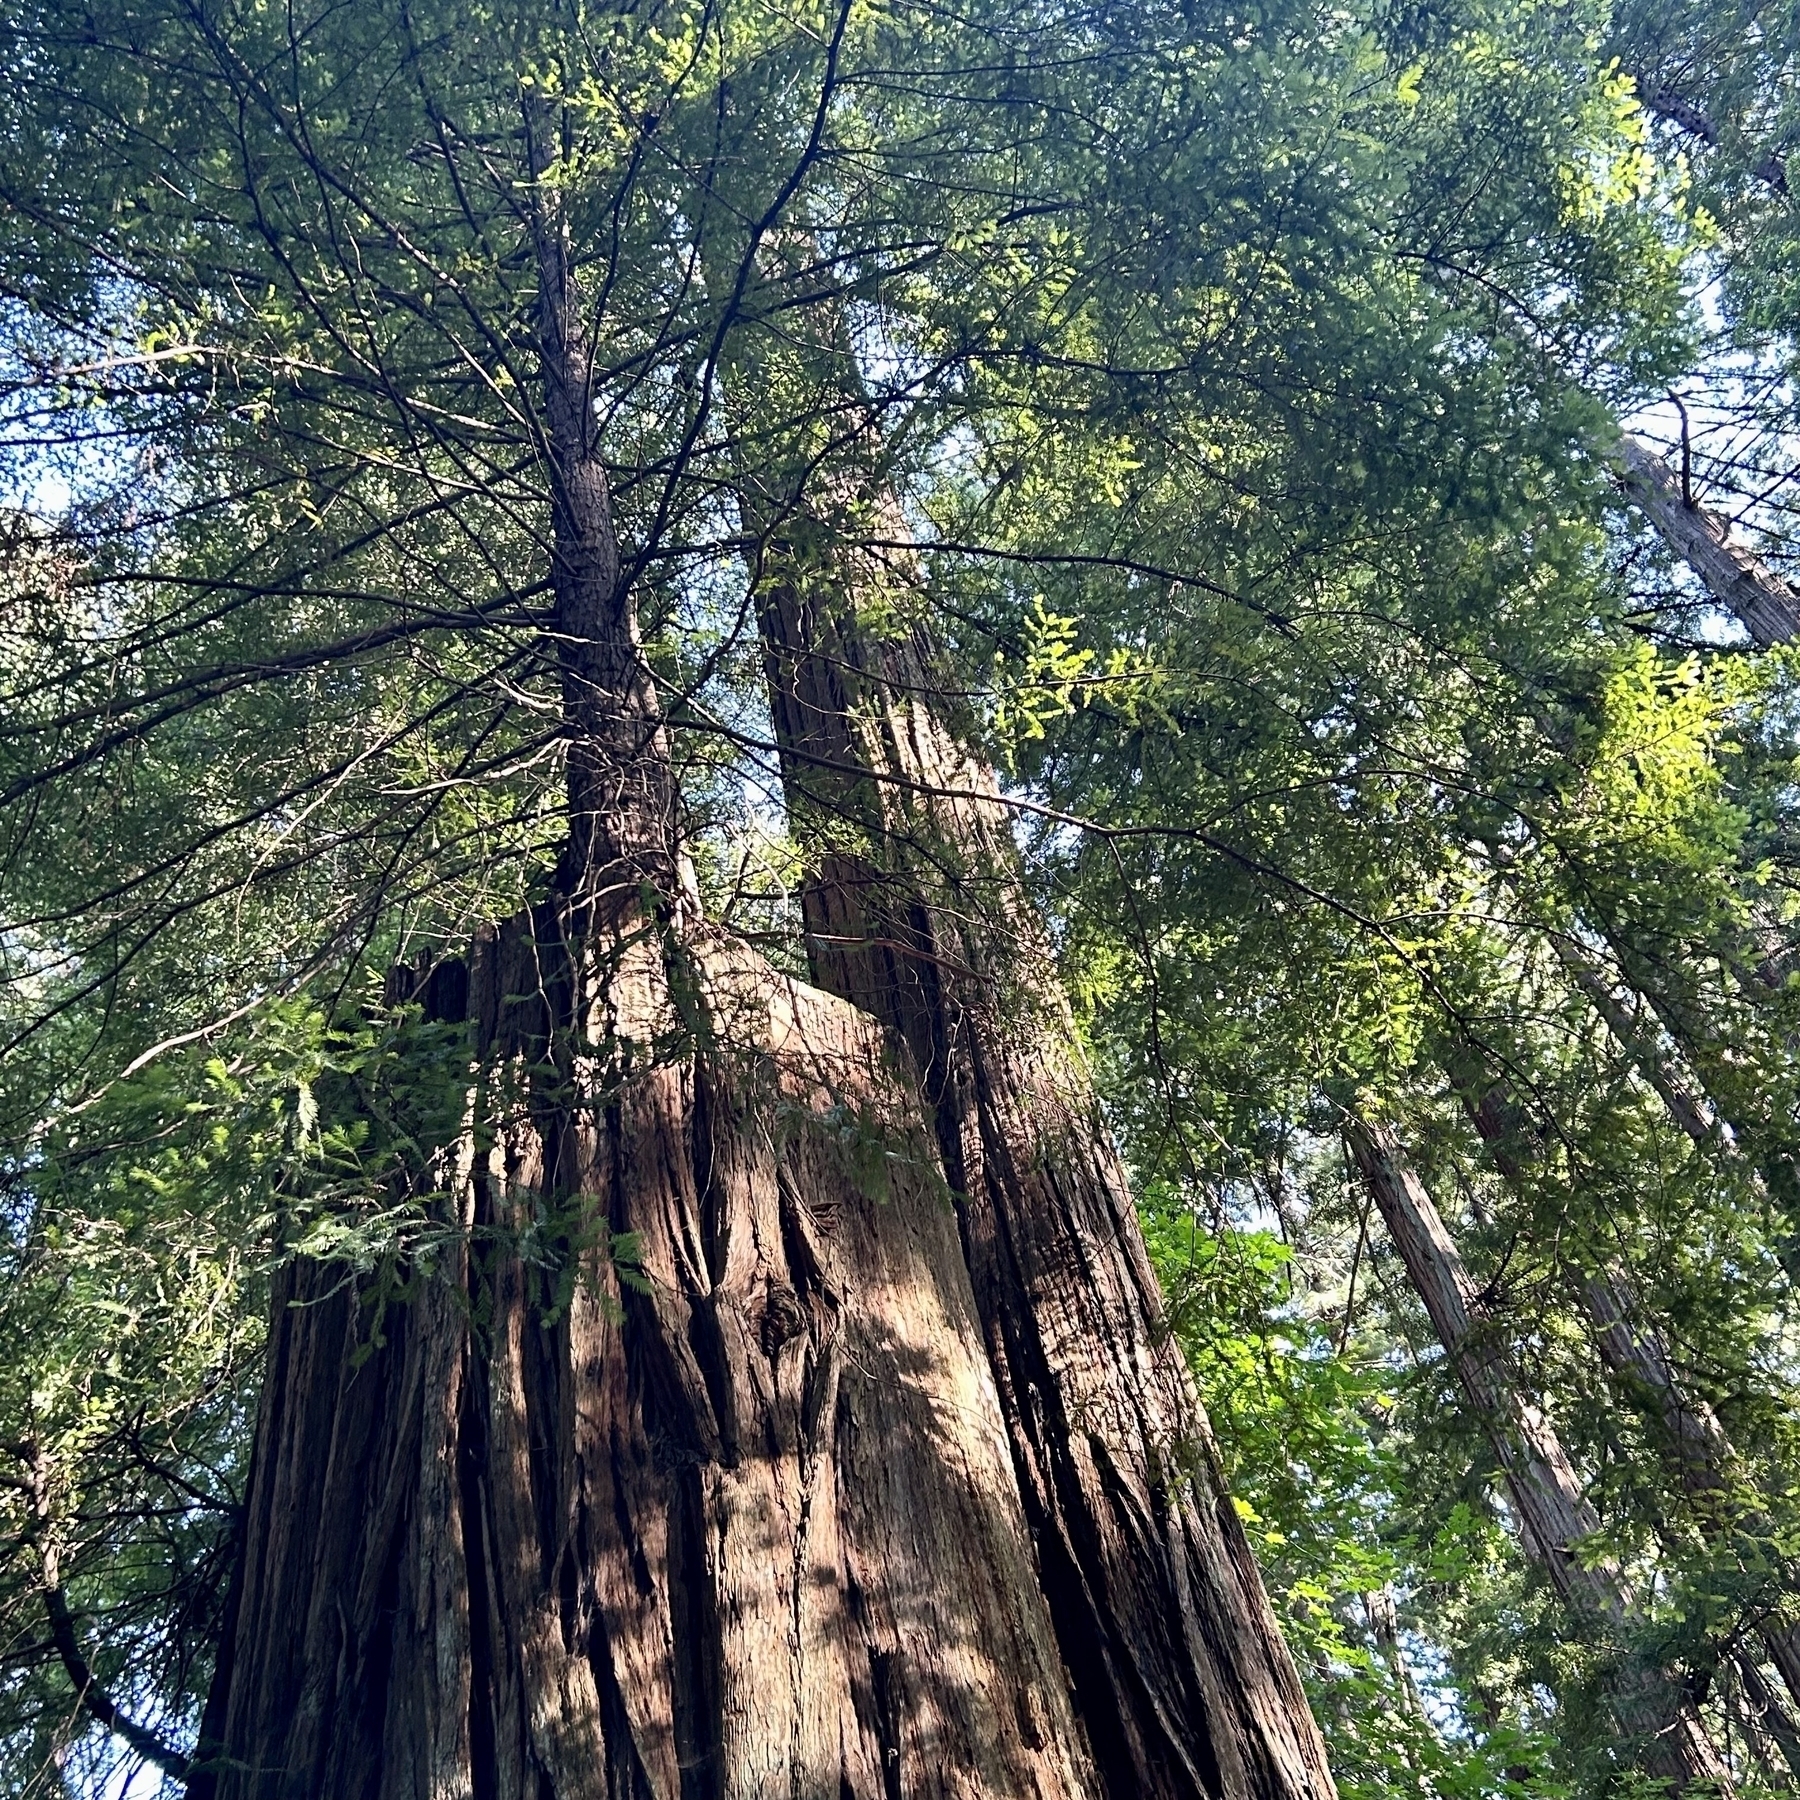 What appears to be a big tree growing out of the stump of a California Redwood